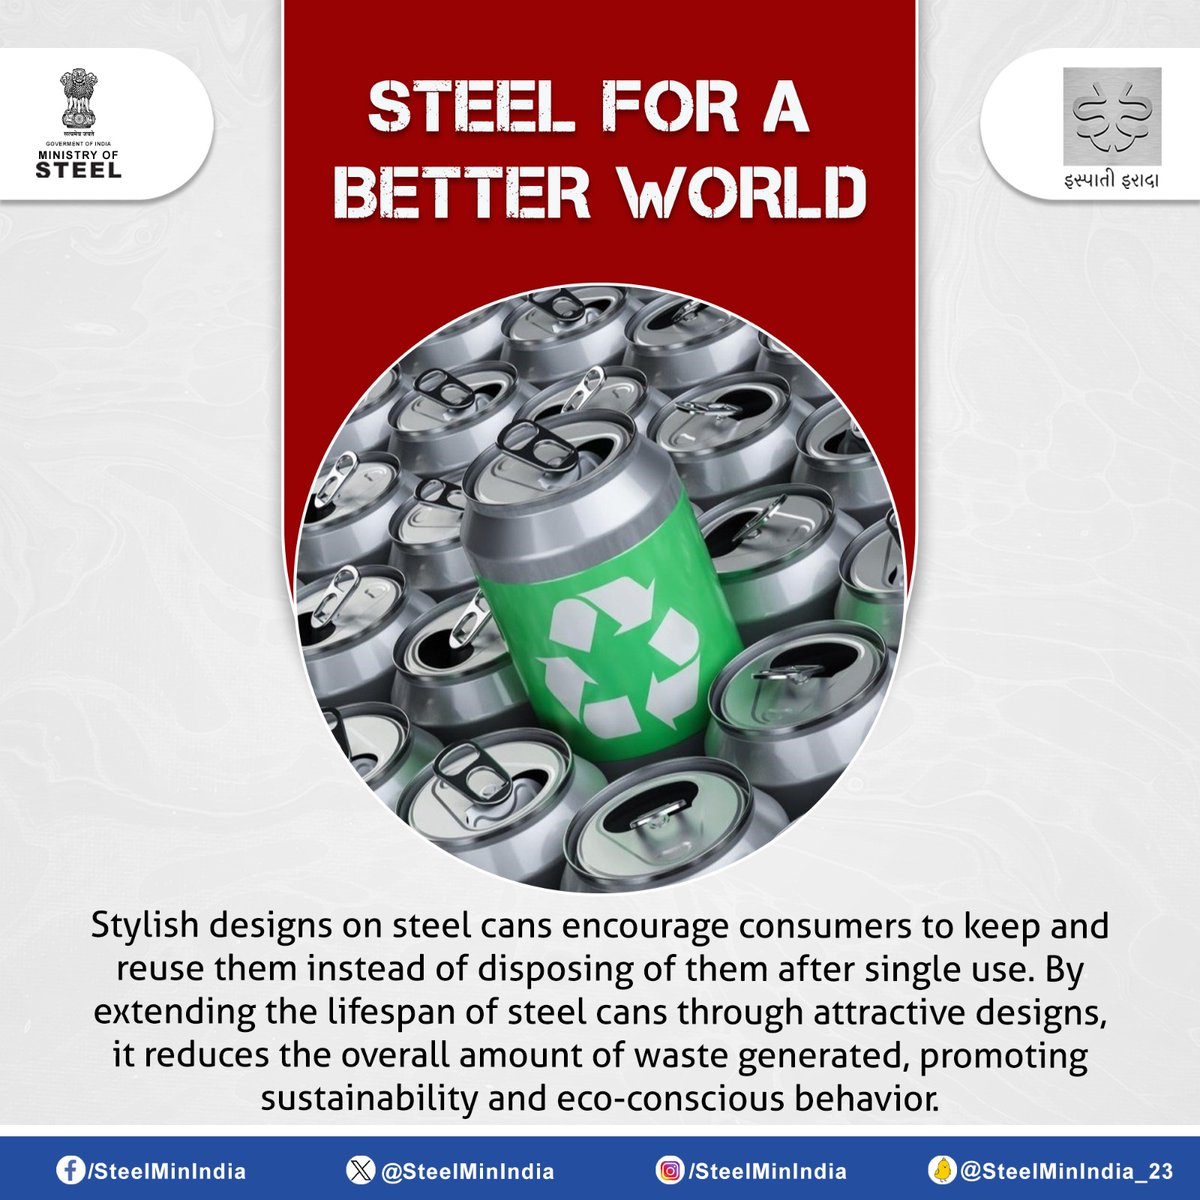 Discover the eco-friendly essence of steel in our journey towards a better world. From its recyclability to its durability, steel is shaping a sustainable future. Let's build greener together! 🌱🏗️ #SteelForABetterWorld #SustainableSteel #IspatiGyan #IspatiIrada